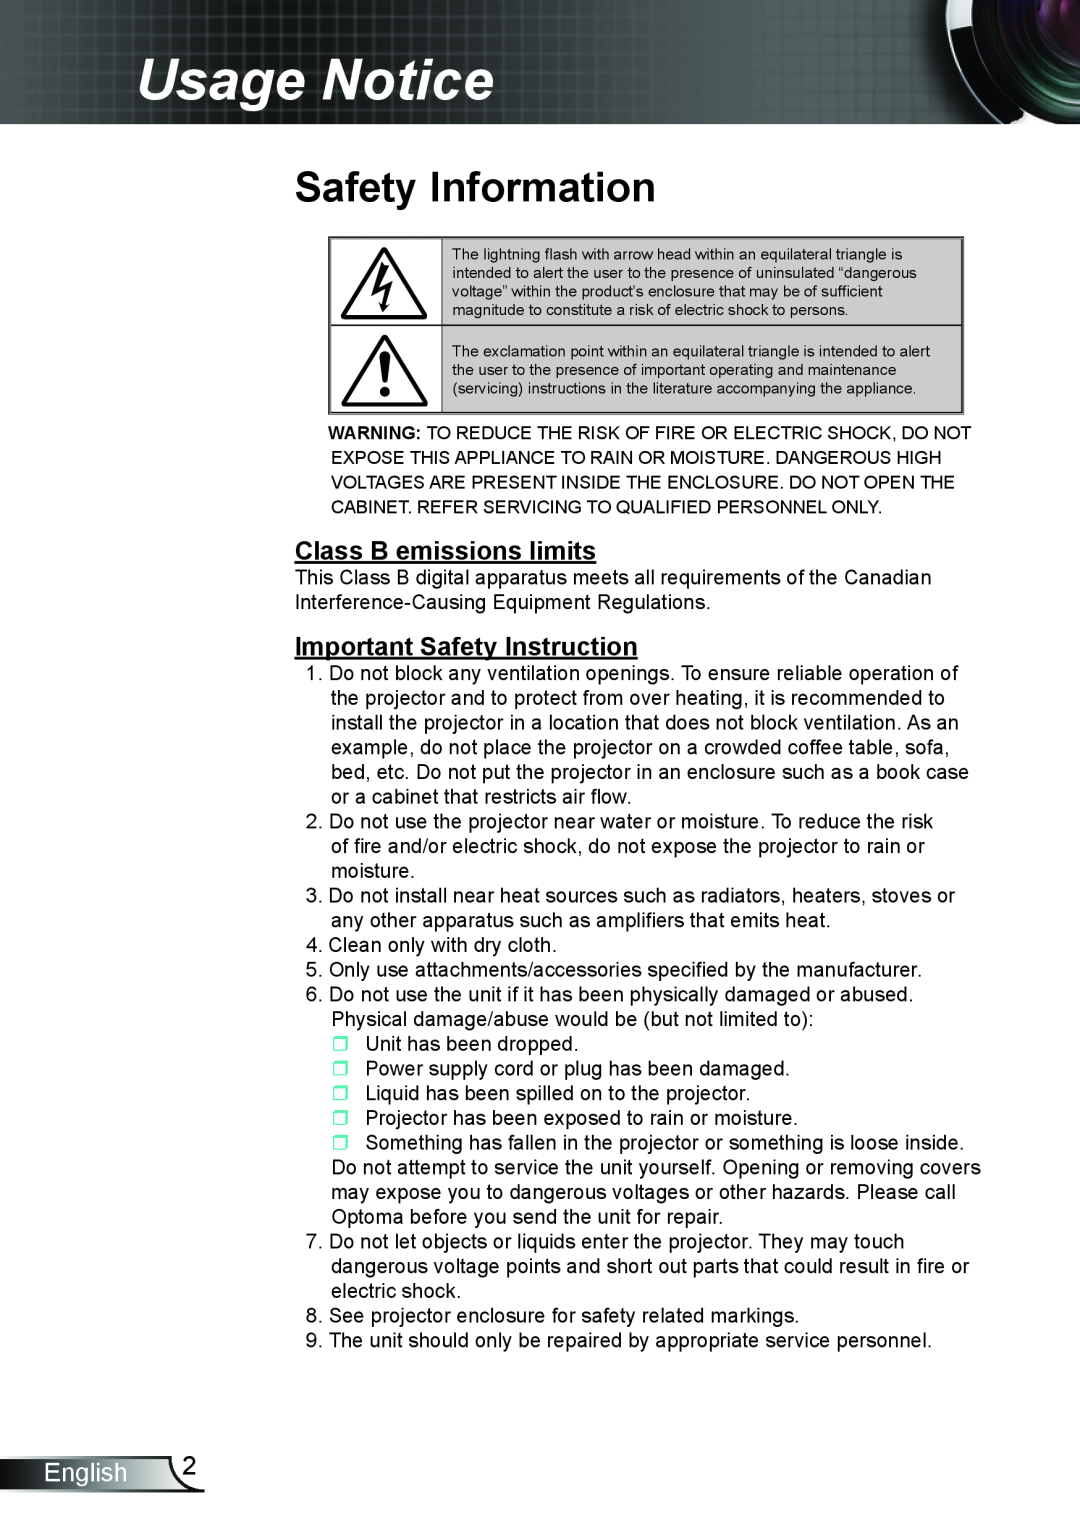 Optoma Technology TW762 Usage Notice, Safety Information, Class B emissions limits, Important Safety Instruction, English 